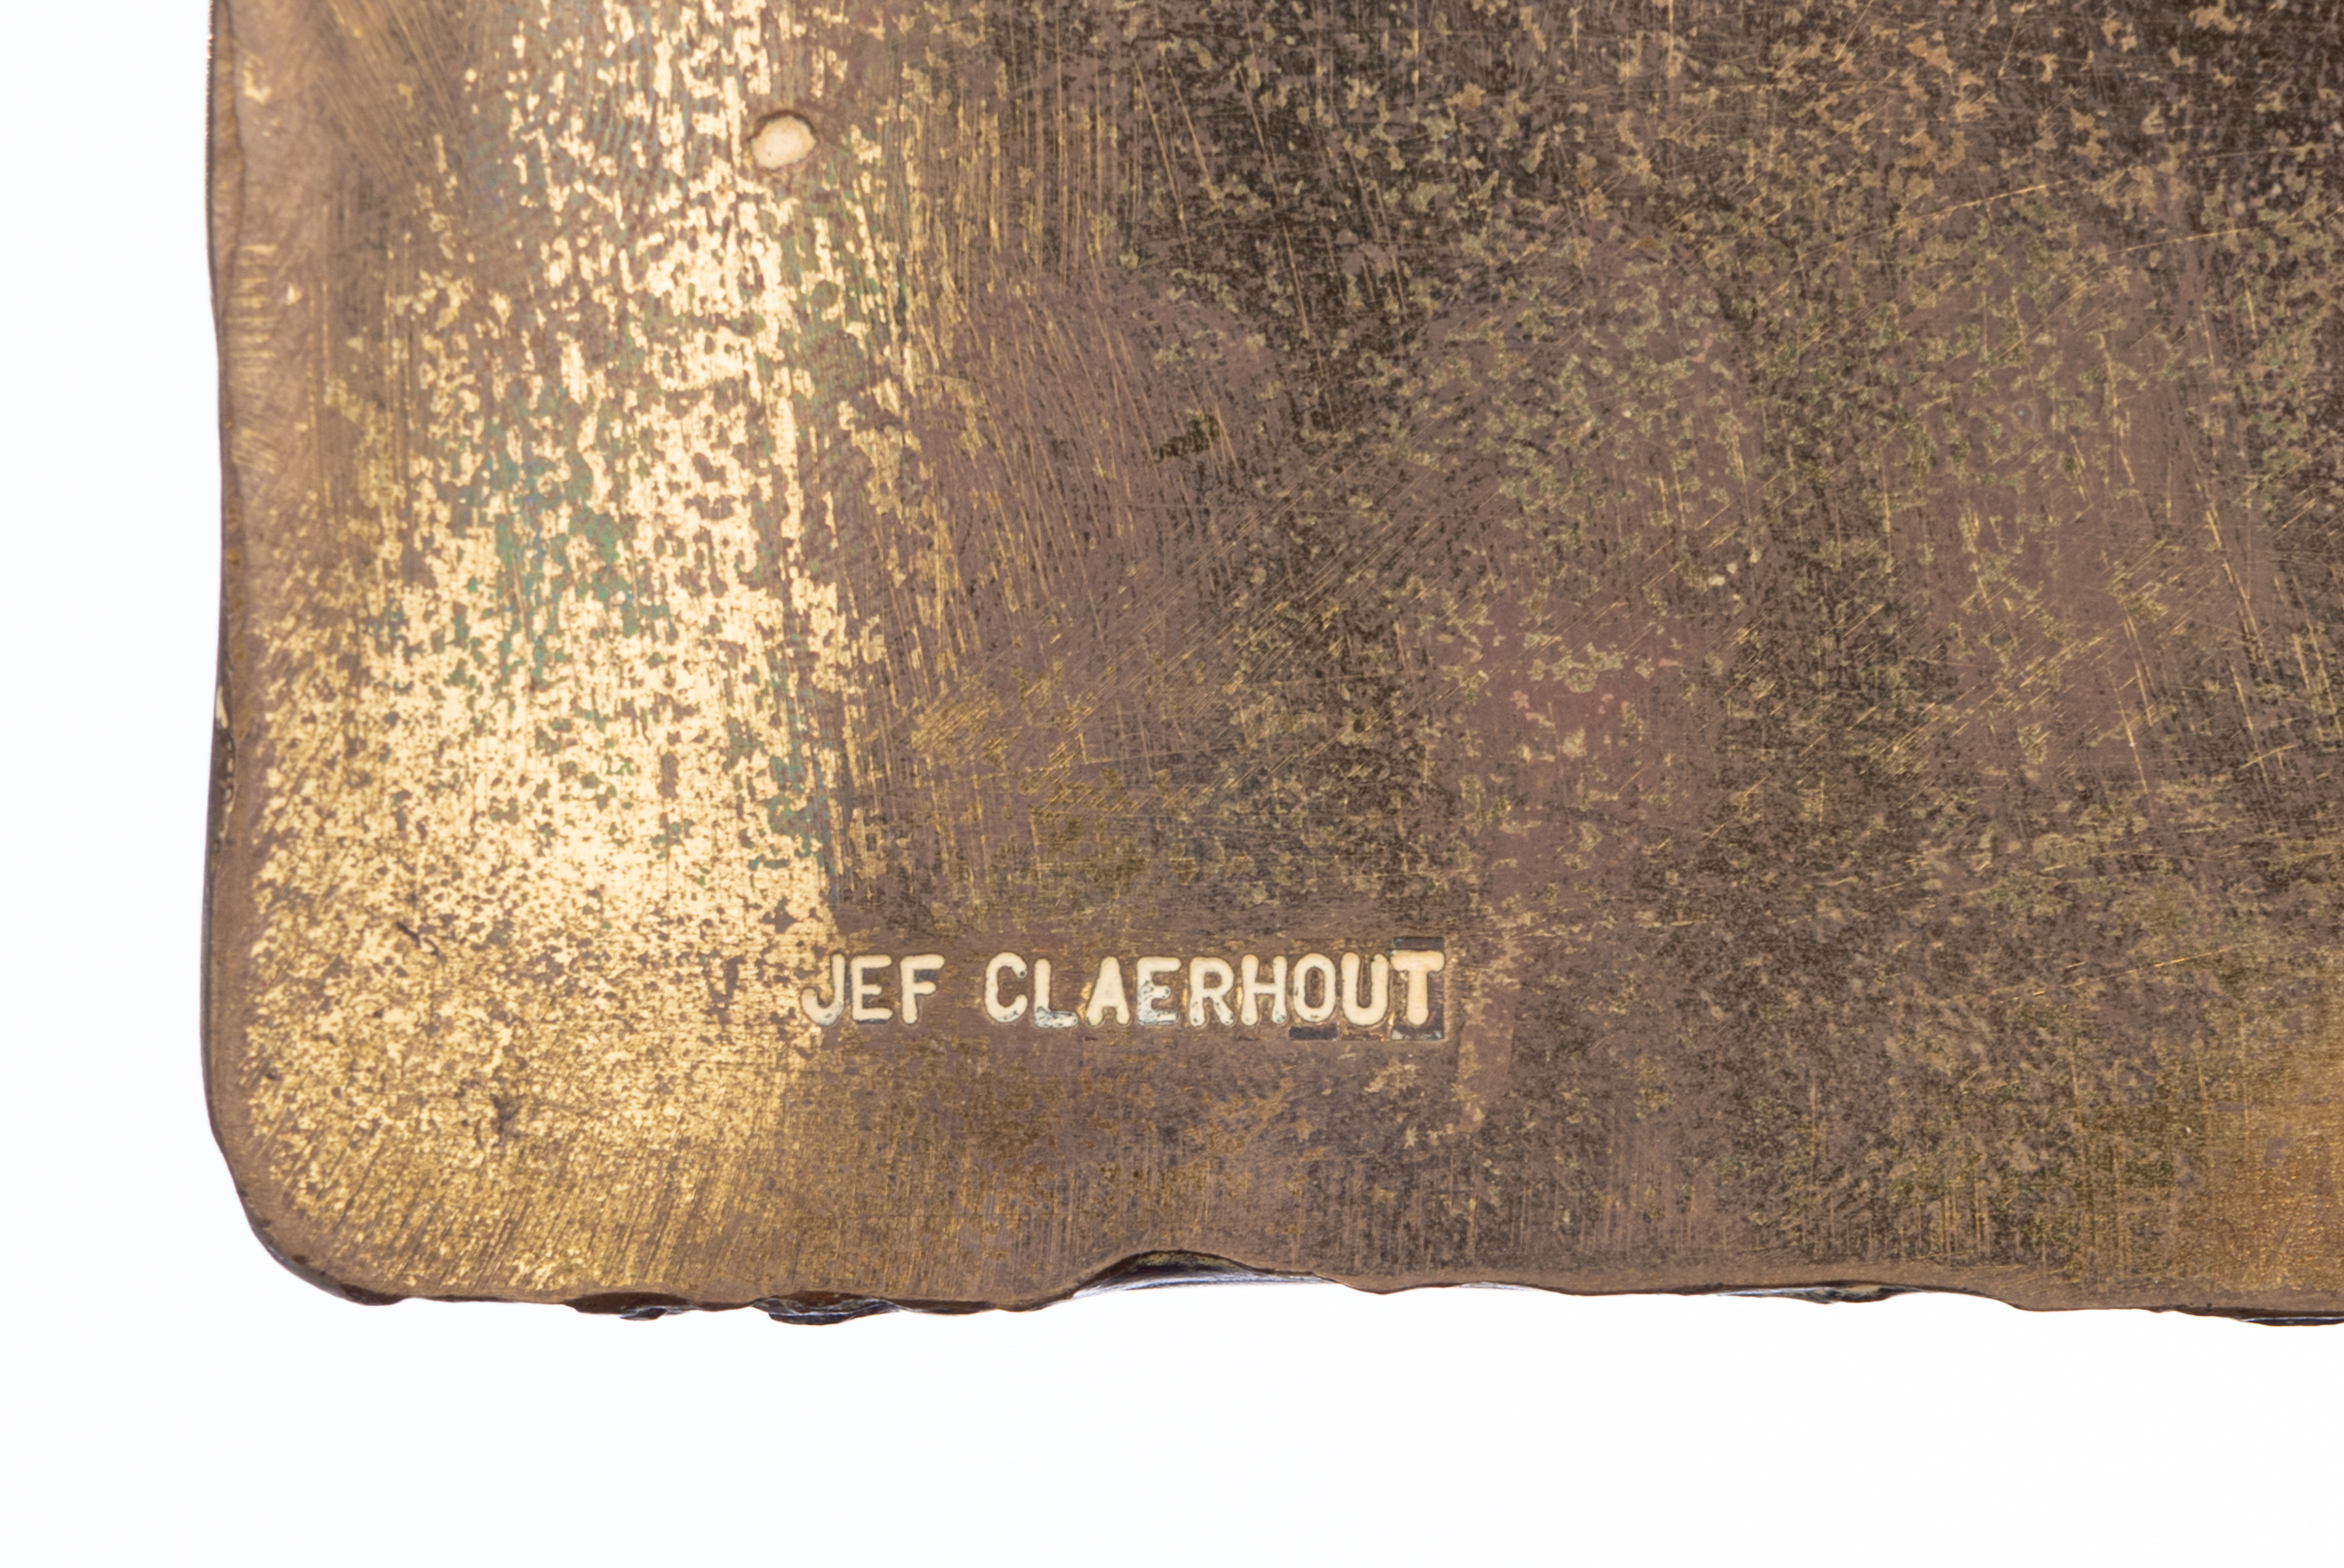 Claerhout J., untitled, patinated bronze, H 42 - W 46 cm. Added: Verjans R., untitled, dated 1975, N - Image 11 of 12